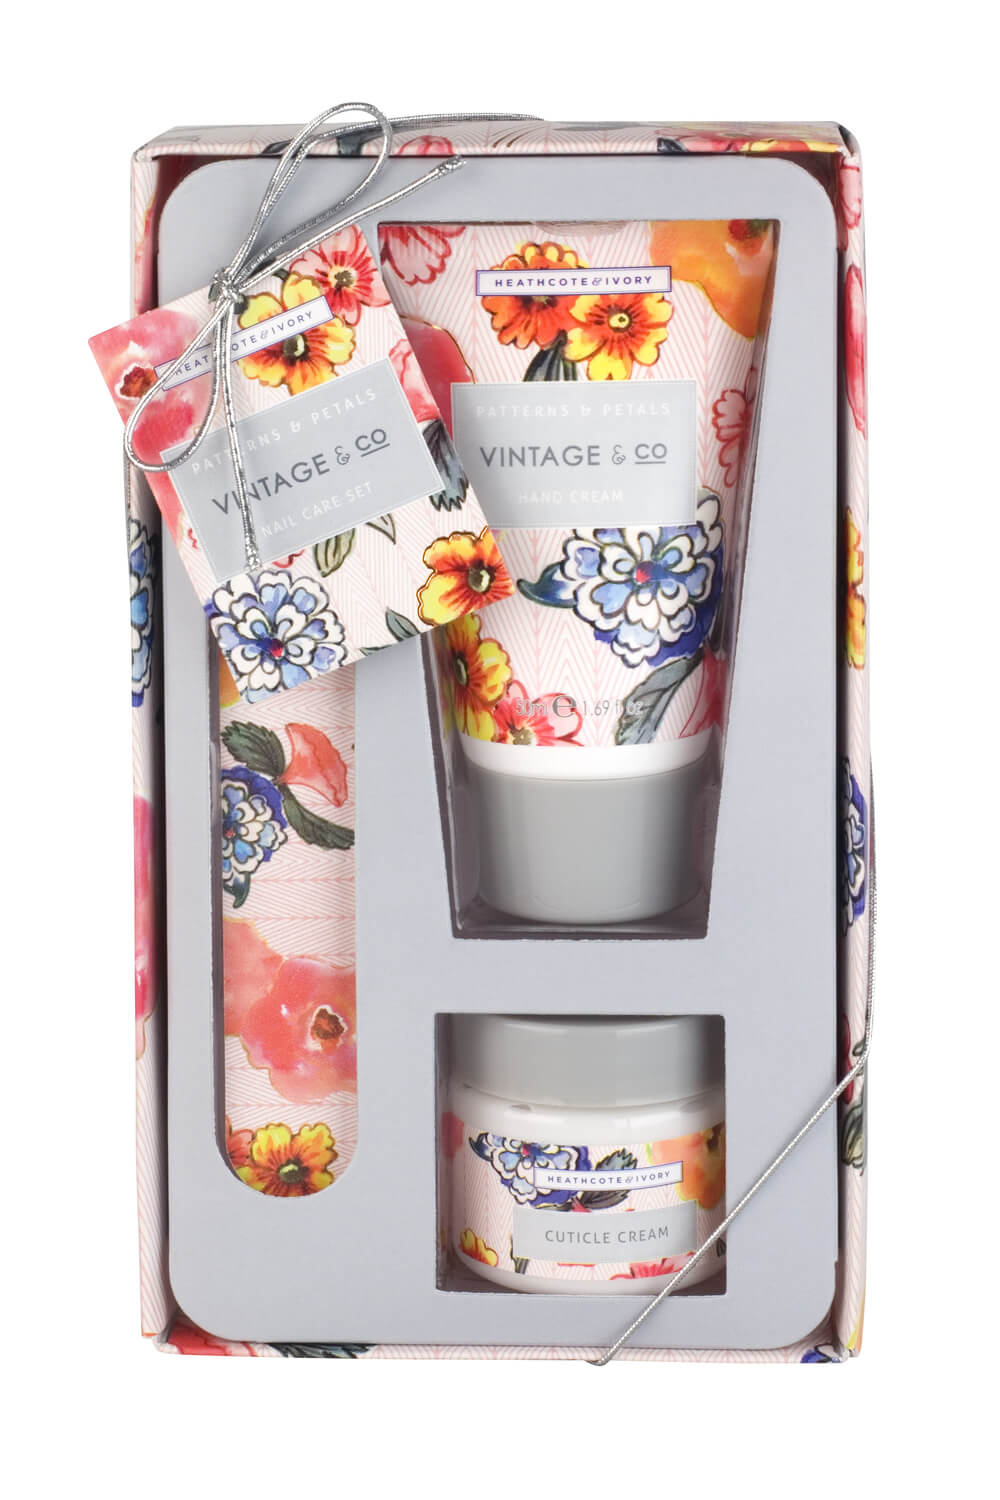 Vintage and Co Patterns and Petals Nail Care Set